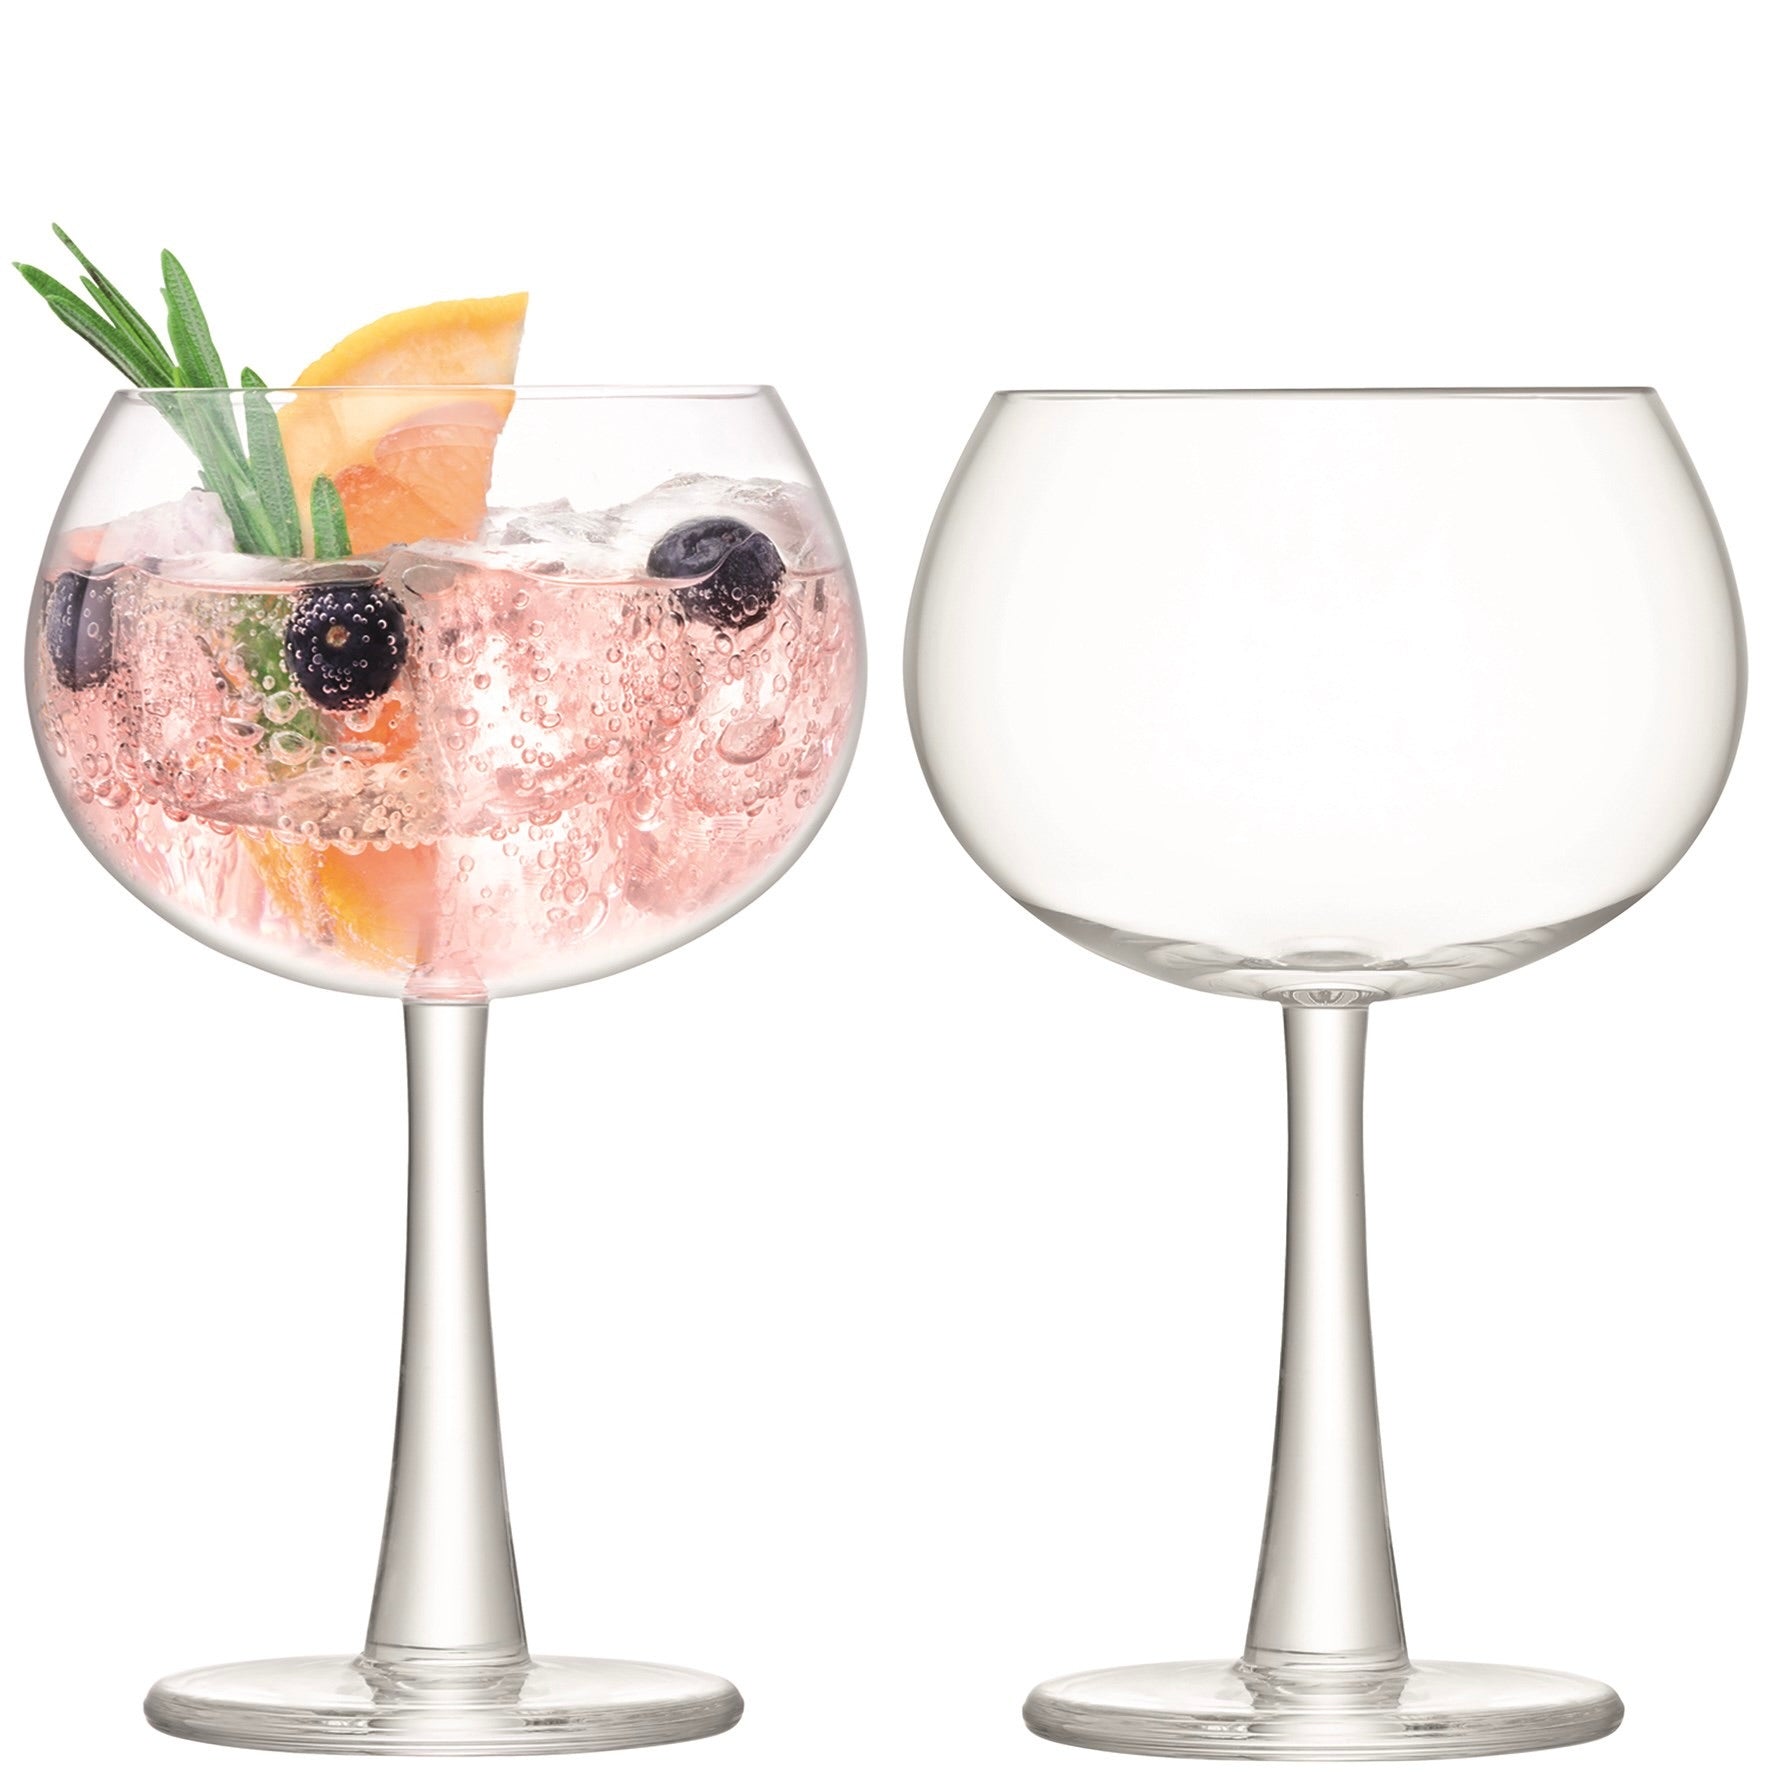 Gin Balloon Glass set of 2 - by LSA